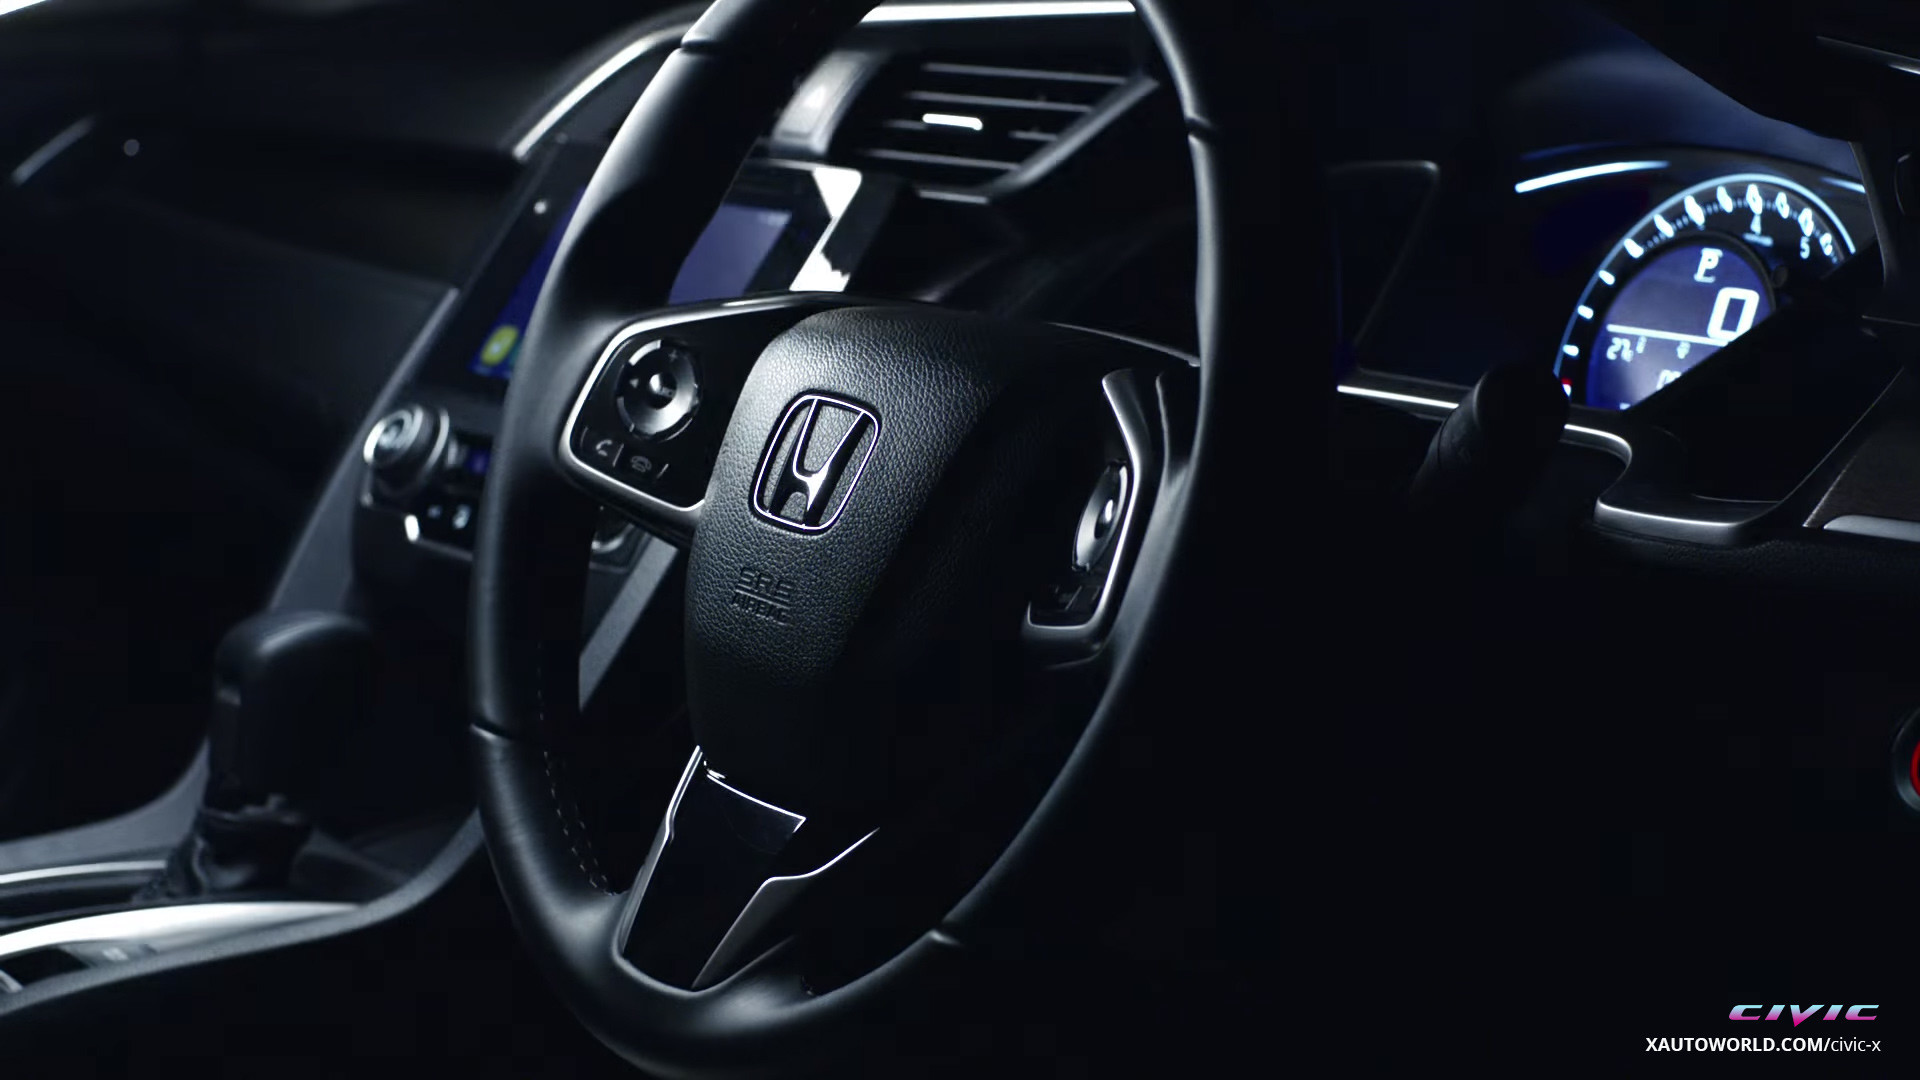 1920x1080 ... 2016 Civic Steering Close-Up ...